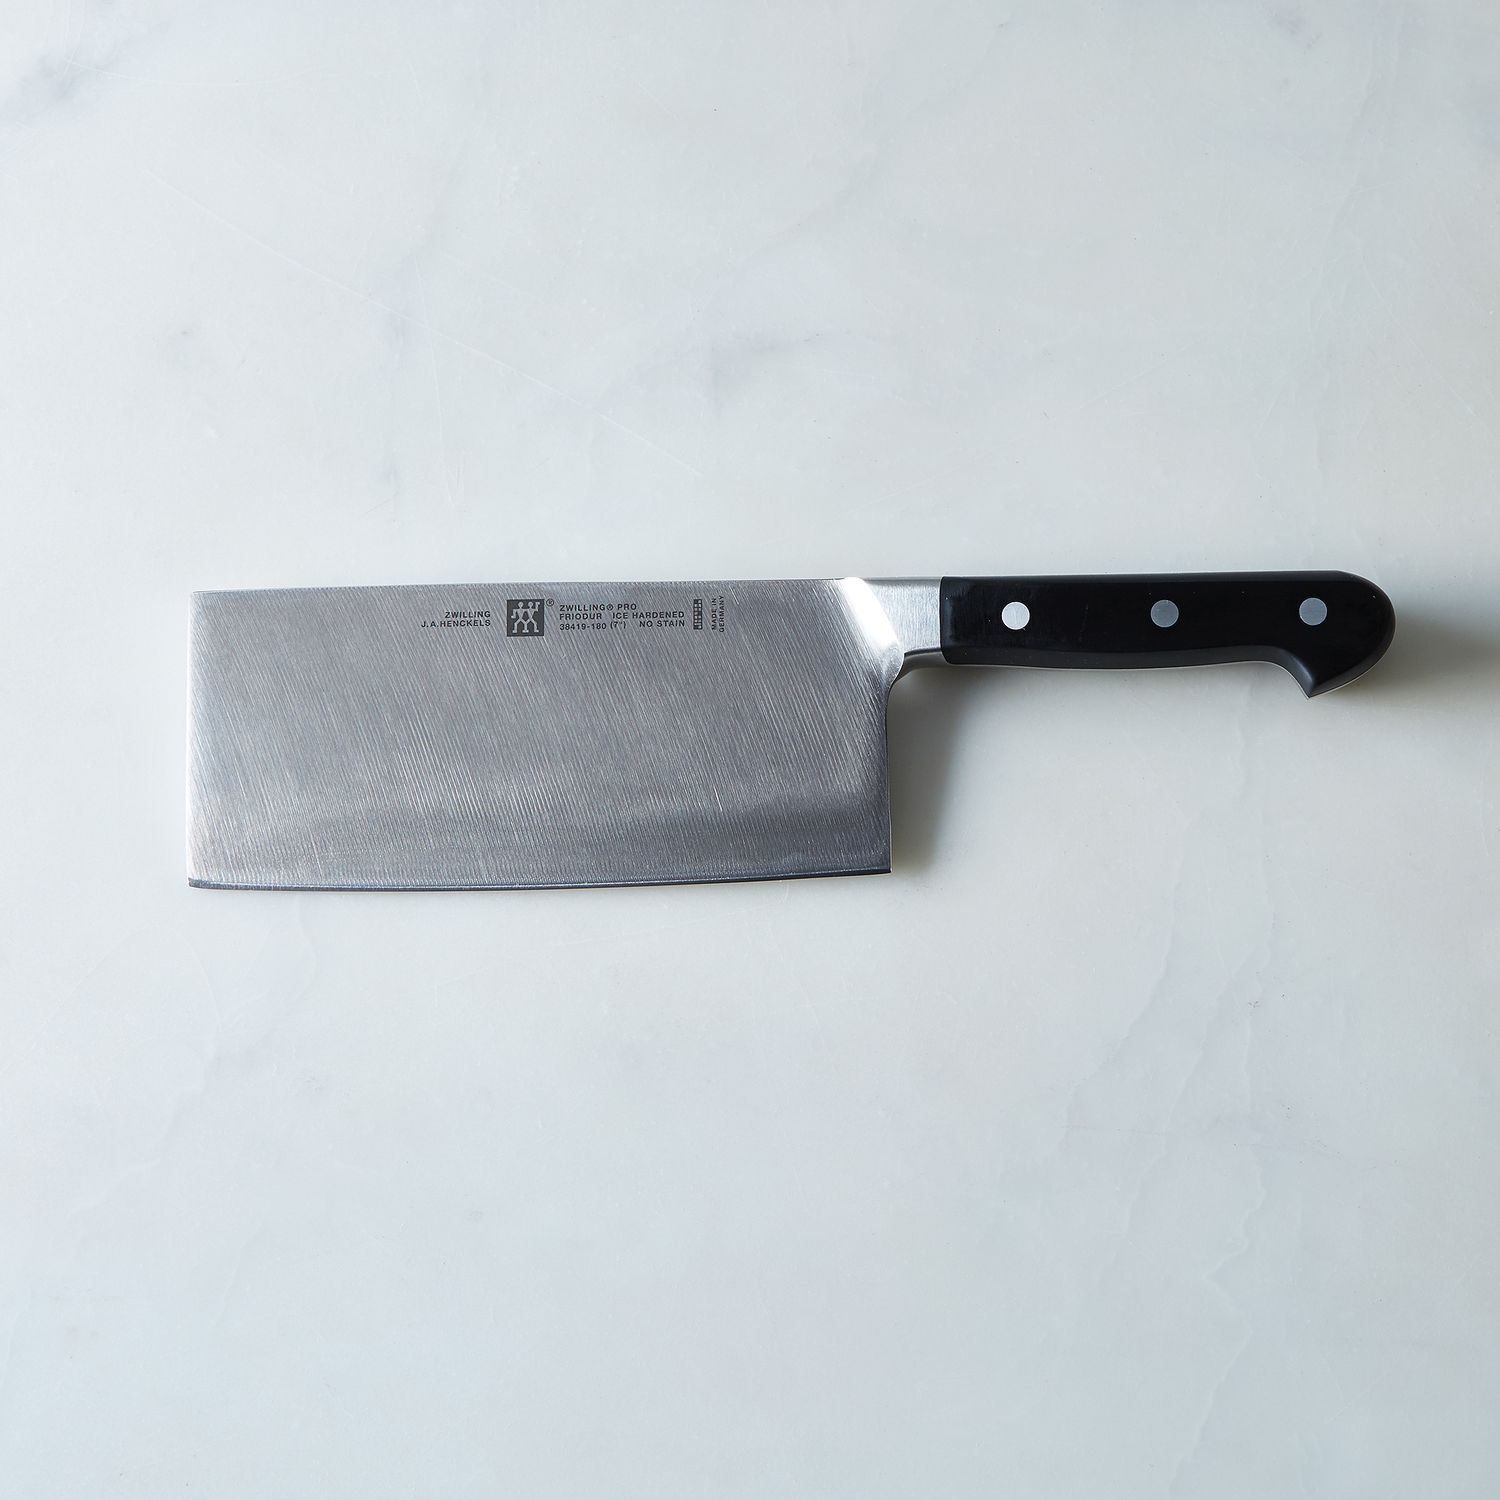 Chinese Vegetable Cleaver 